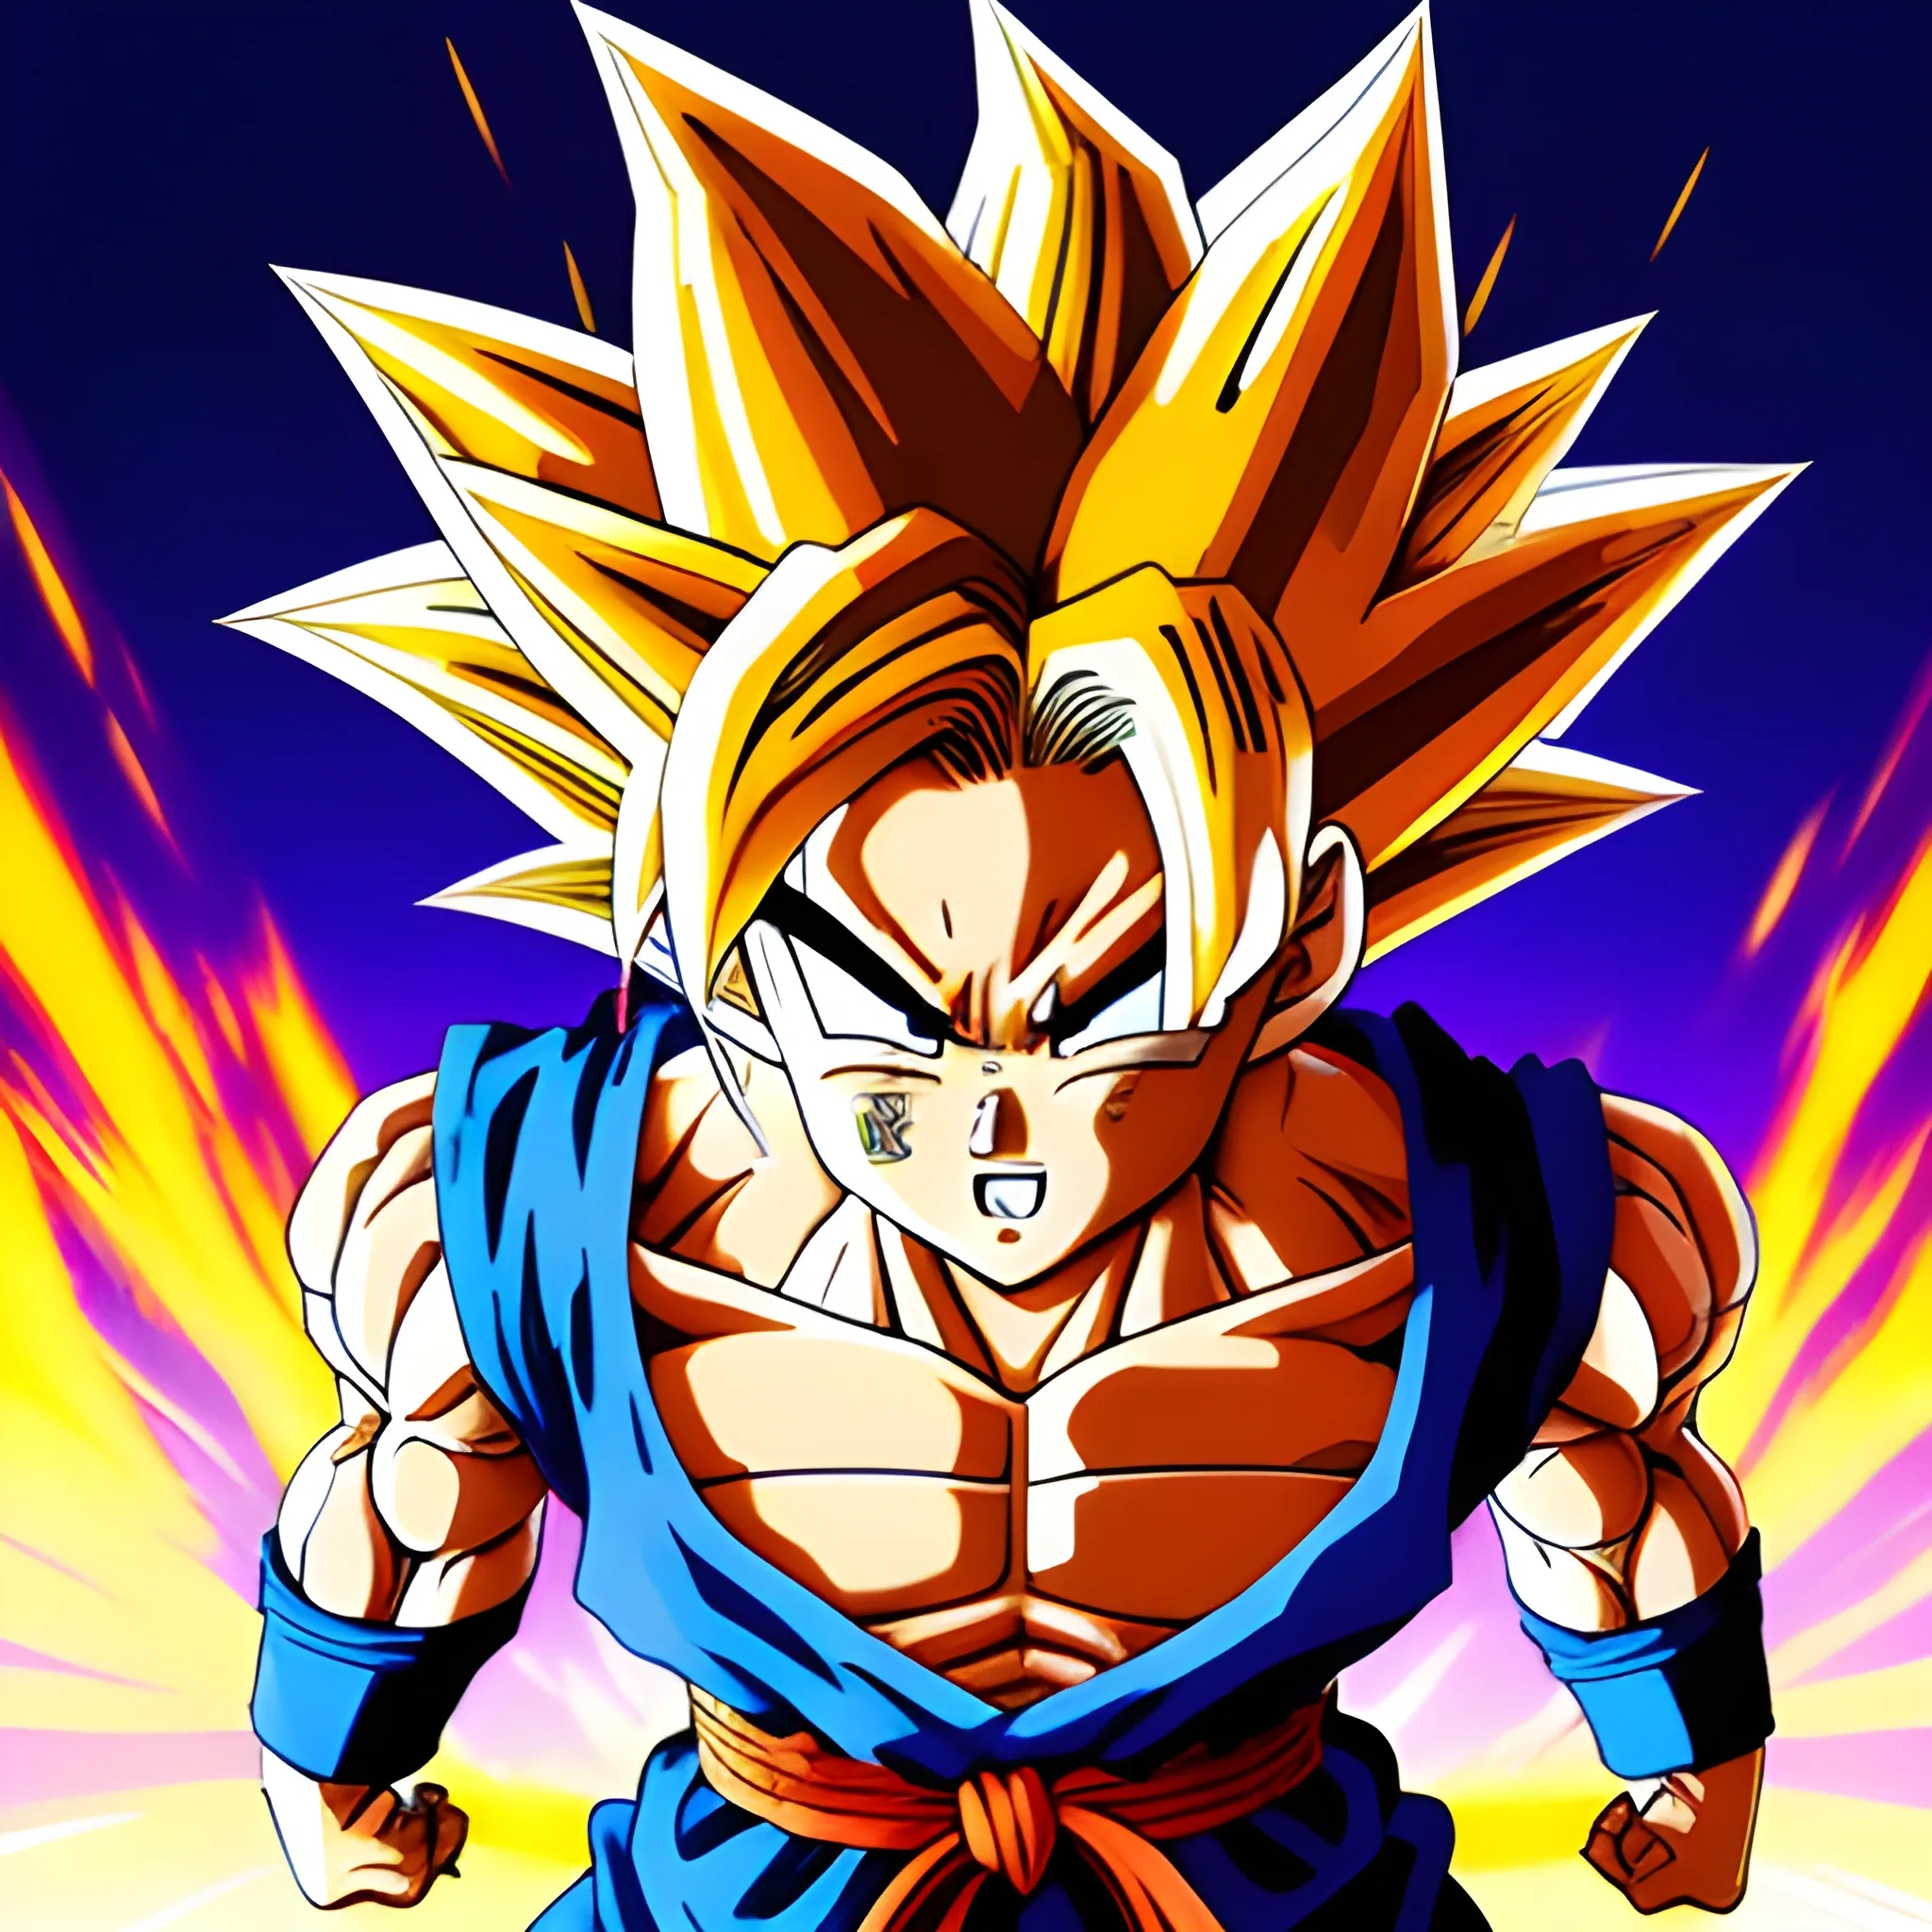 Goku stands in a fighting stance, with an intense, concentrated look on his face. His messy black hair rises slightly on top of his head, and his body is tense and ready to attack. In the background, a mixture of starry sky and dark clouds can be seen, suggesting that the scene takes place at night. The atmosphere is tense and exciting, as if Goku is about to fight a powerful enemy. The image is created in anime style, with sharp lines and shadows and vibrant colours. As for the camera, the image is shot from below, as if the viewer is looking up at Goku, 3D.